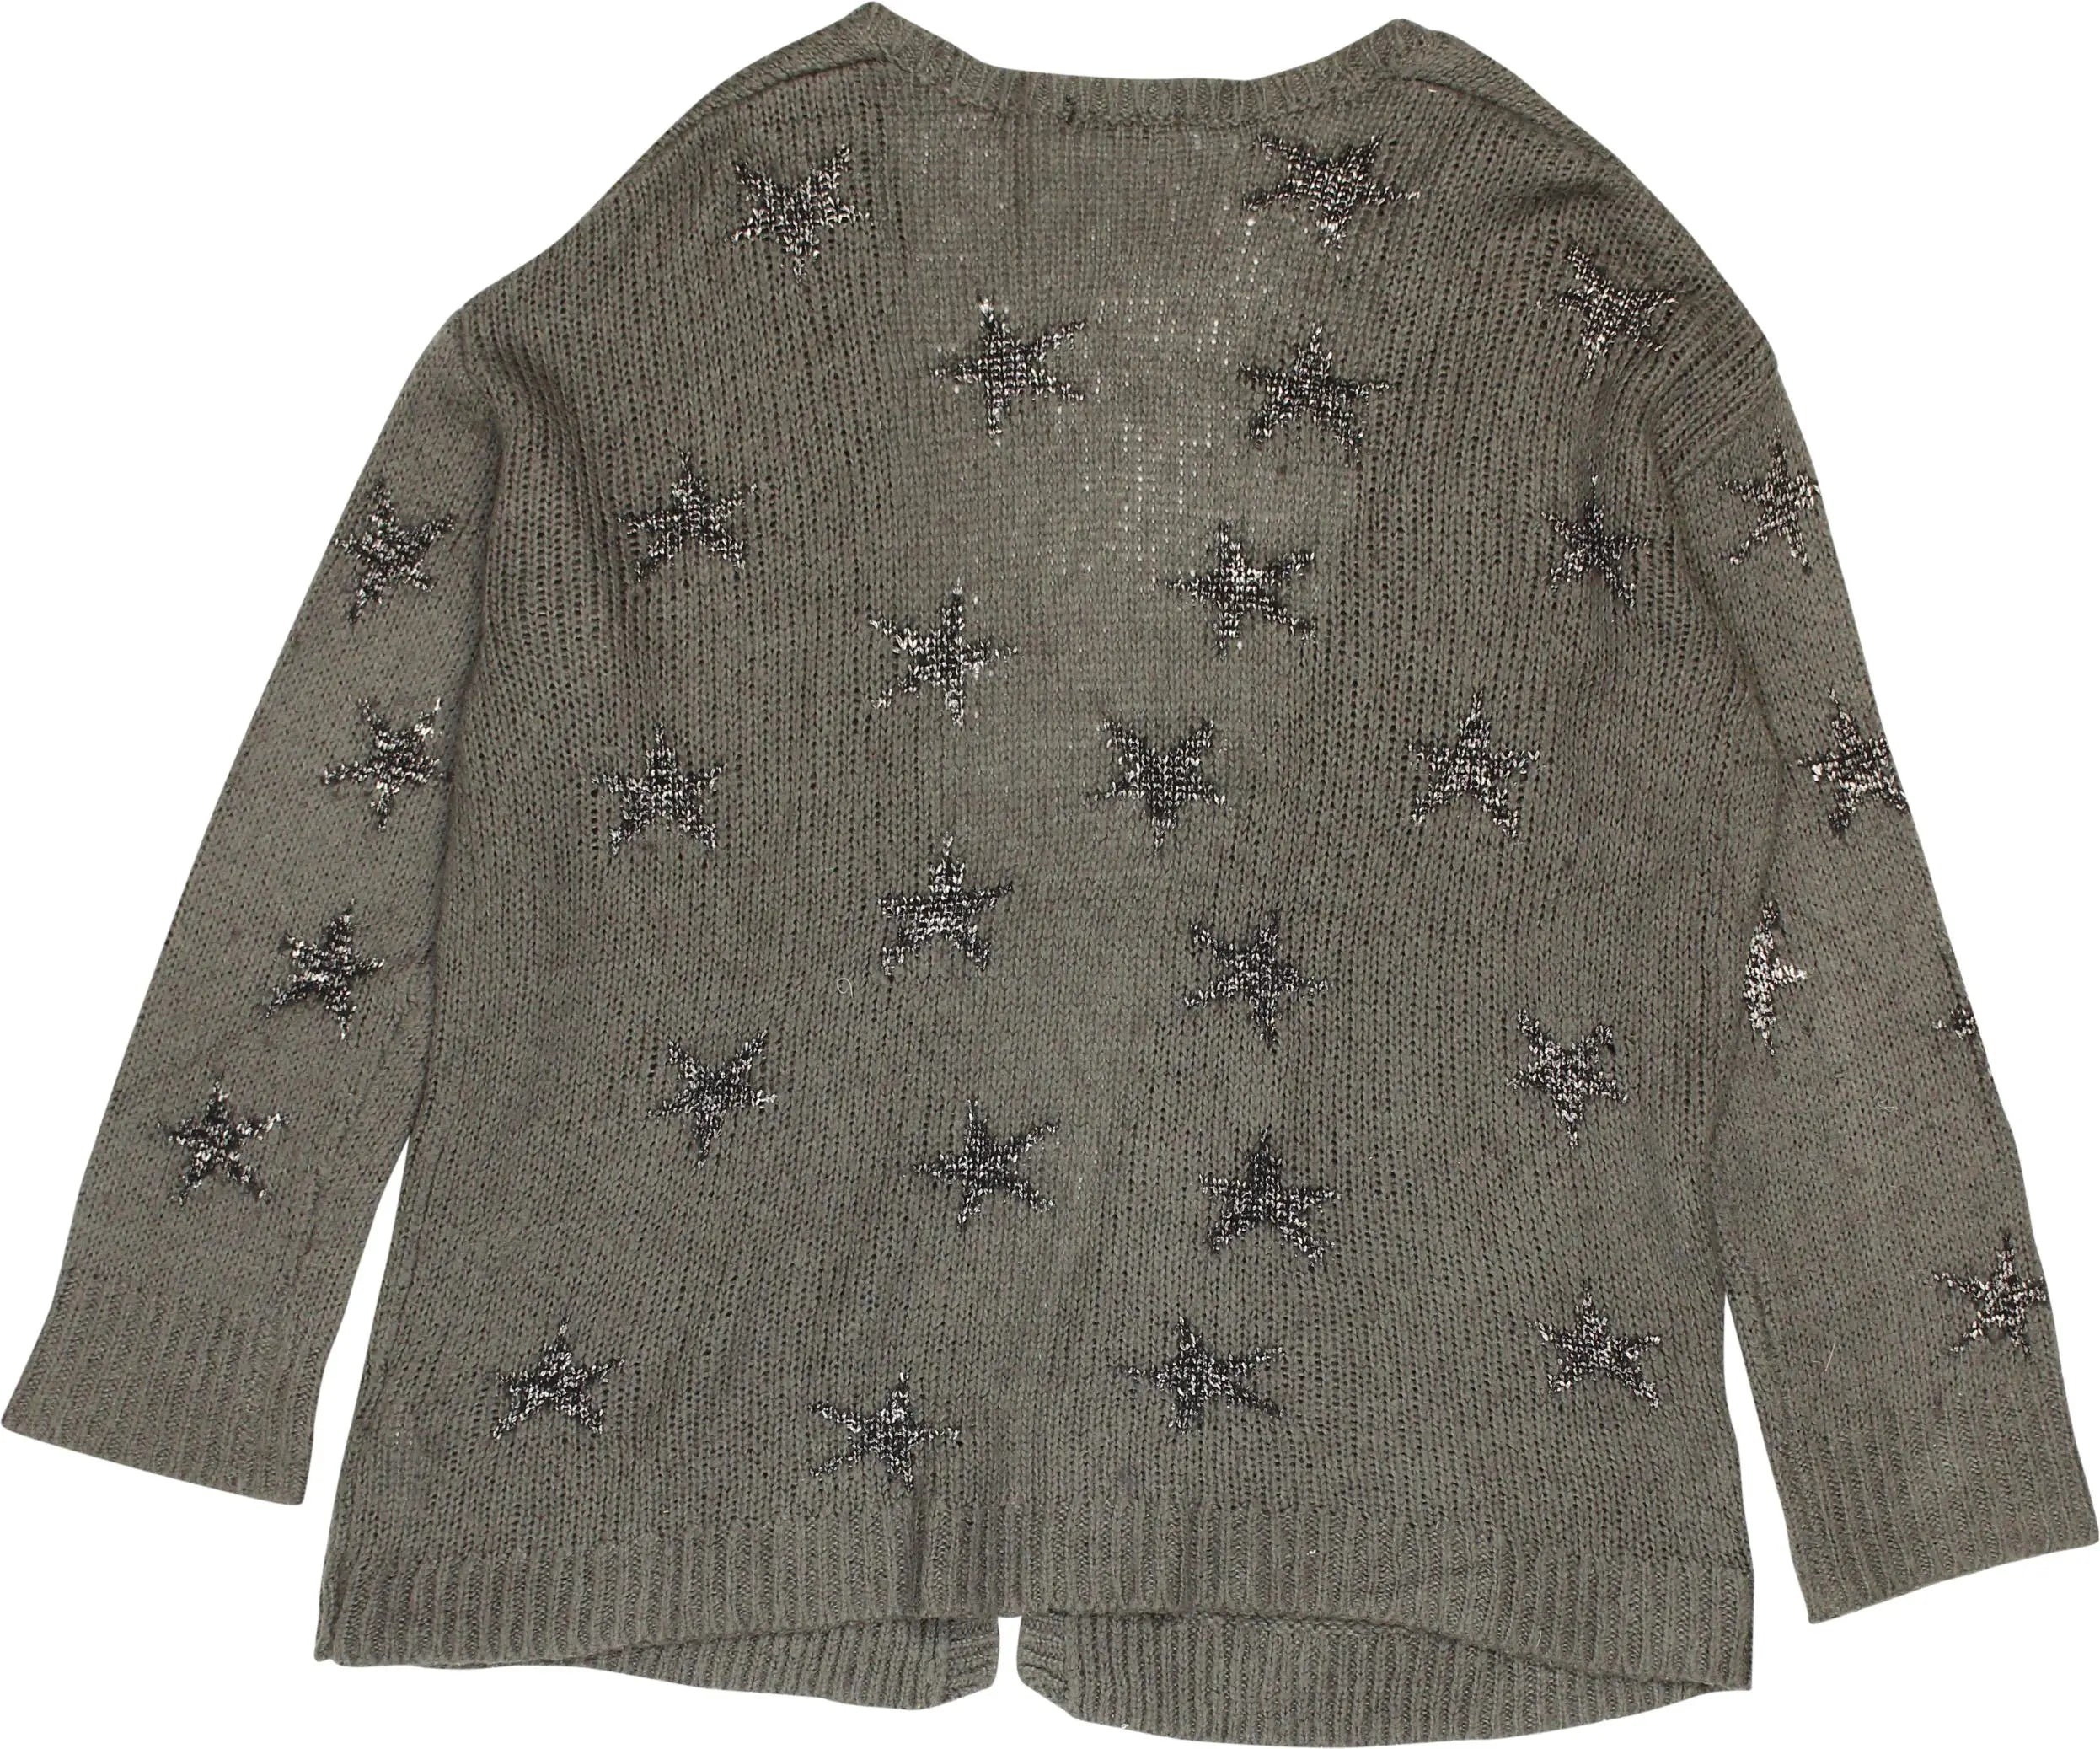 H&M - Stars Cardigan- ThriftTale.com - Vintage and second handclothing